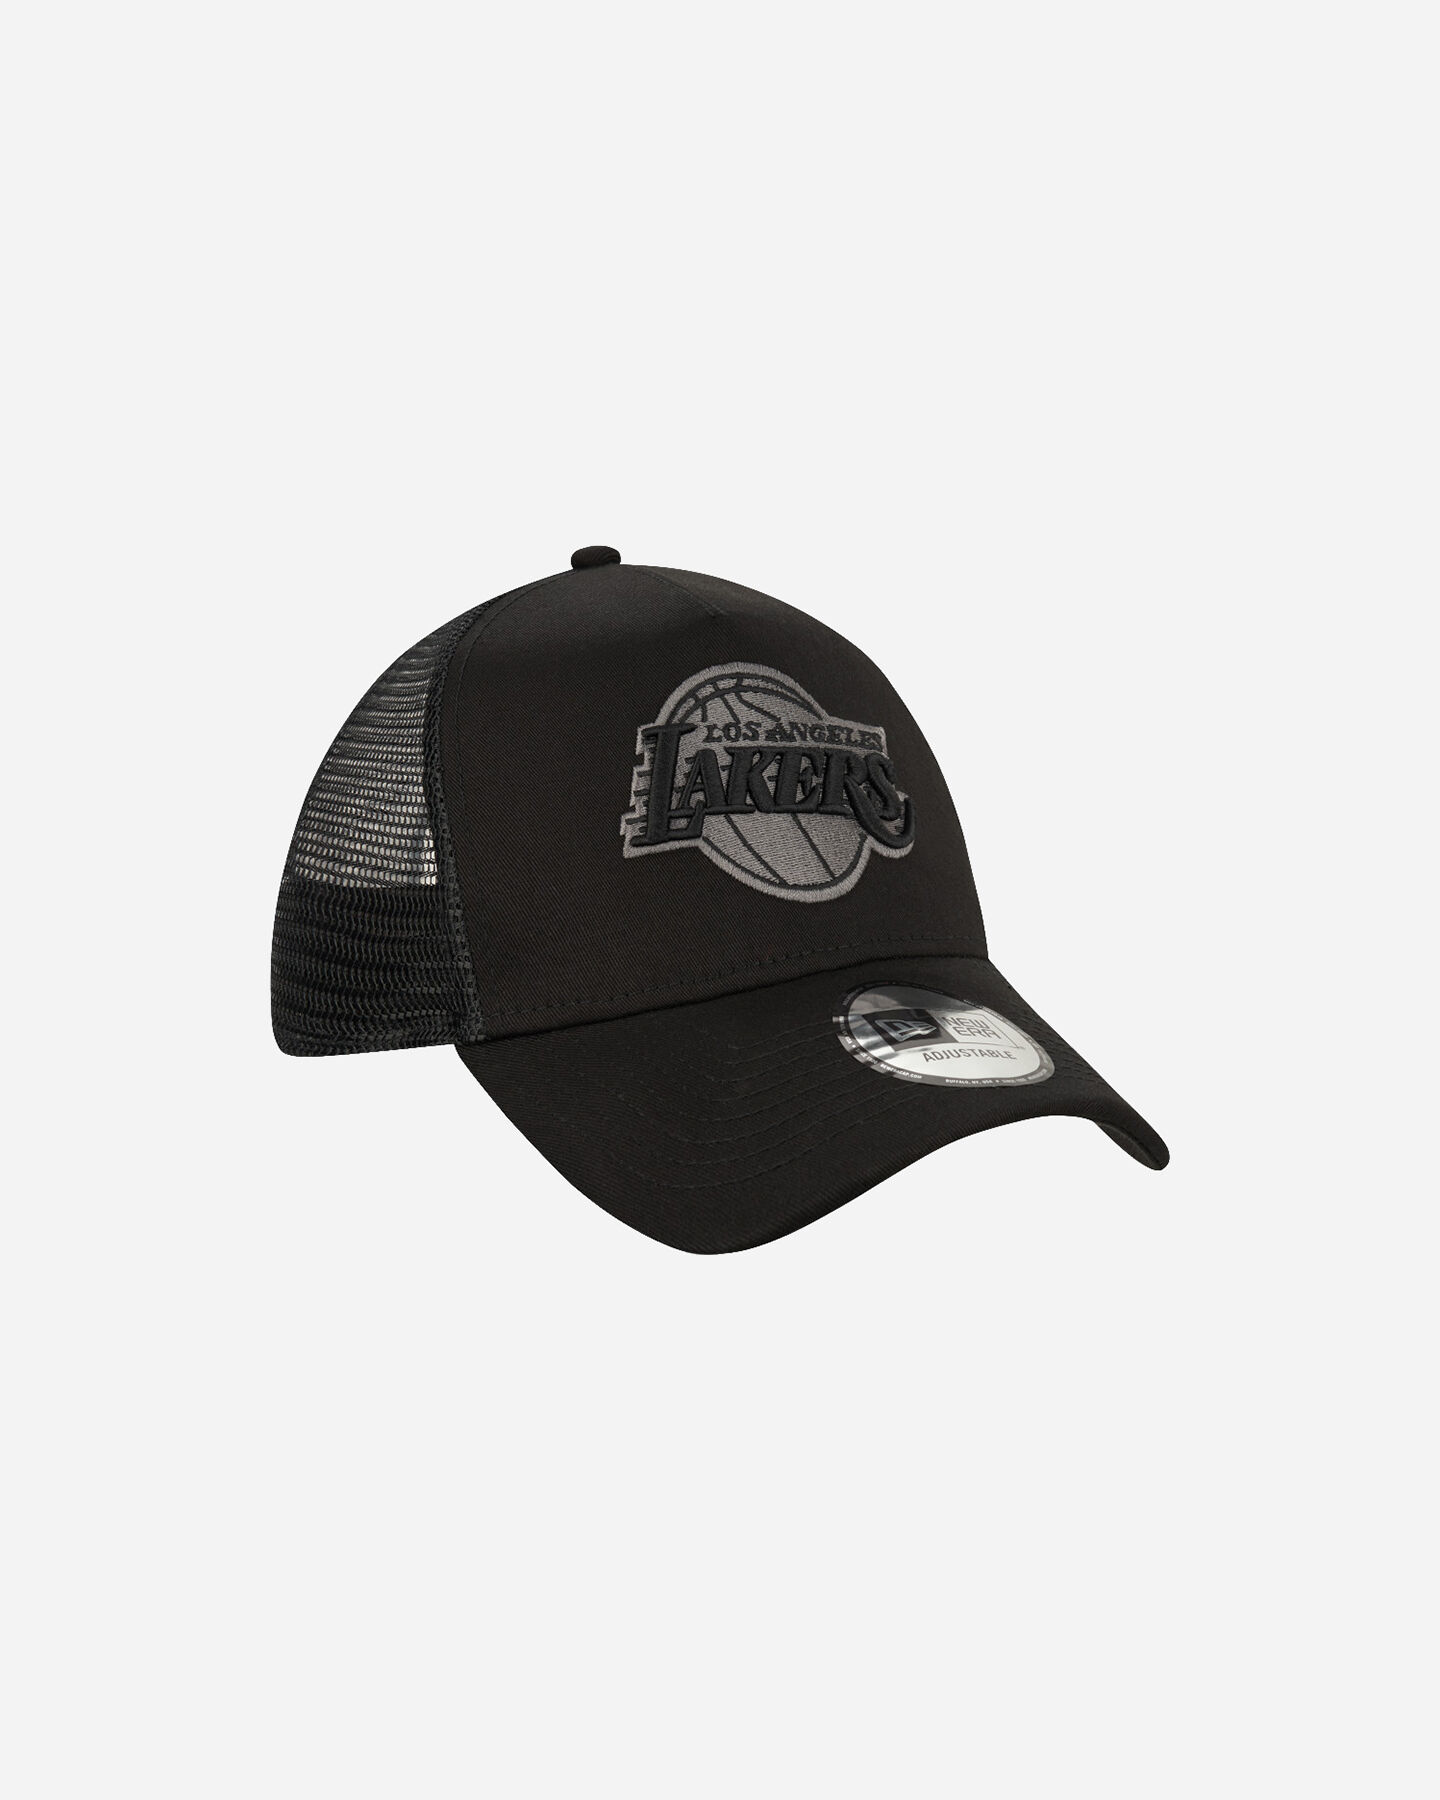  Cappellino NEW ERA 9FORTY AF TRUCKER LAKERS S5245082|001|OSFM scatto 2